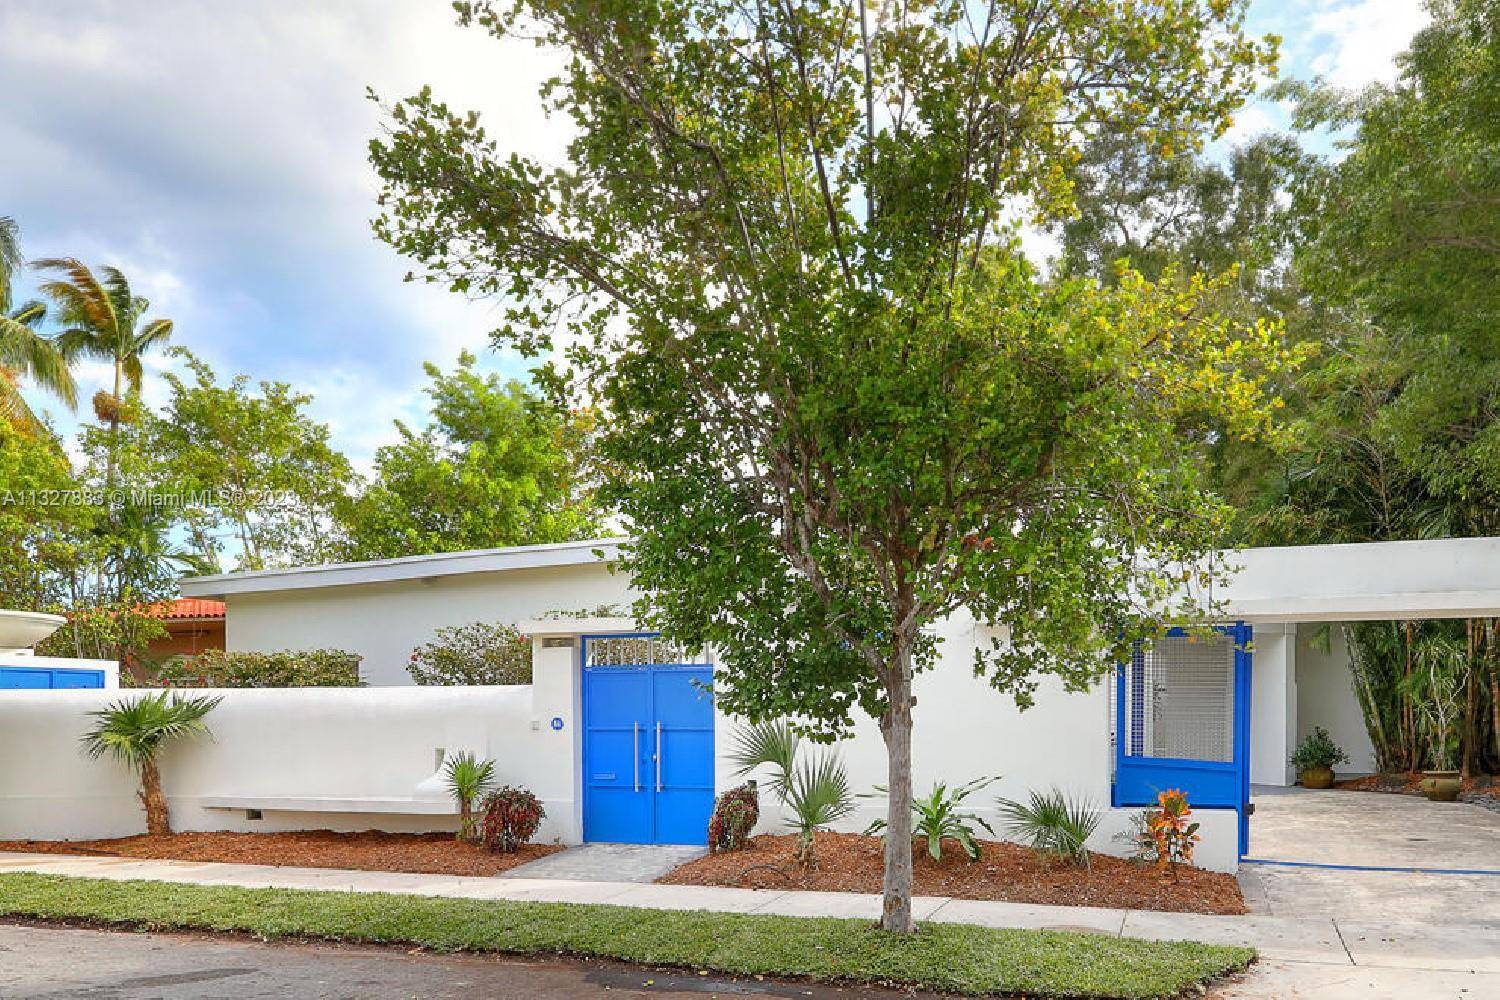 Ultra private, walled gated Miami Modern style home in the exclusive Bay Heights neighborhood of Coconut Grove.